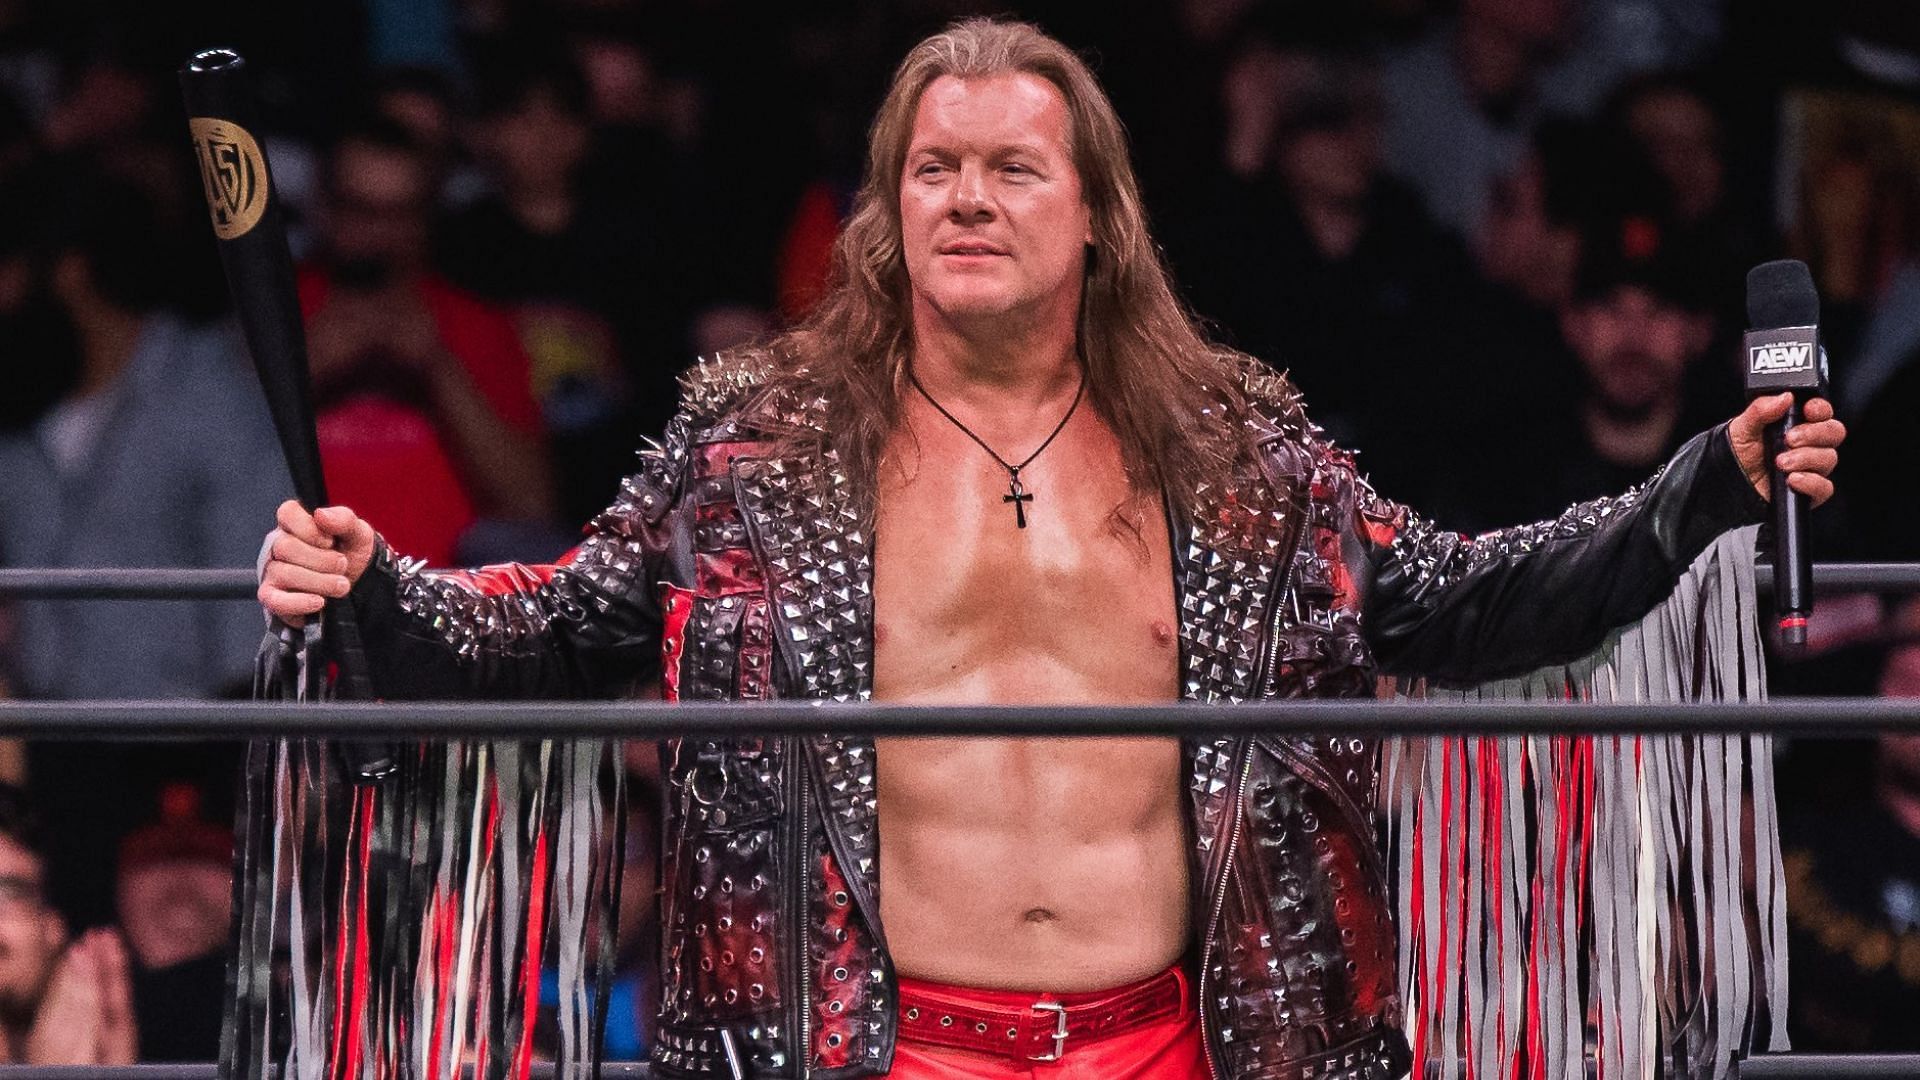 Should Chris Jericho be more picky with the stars he faces?